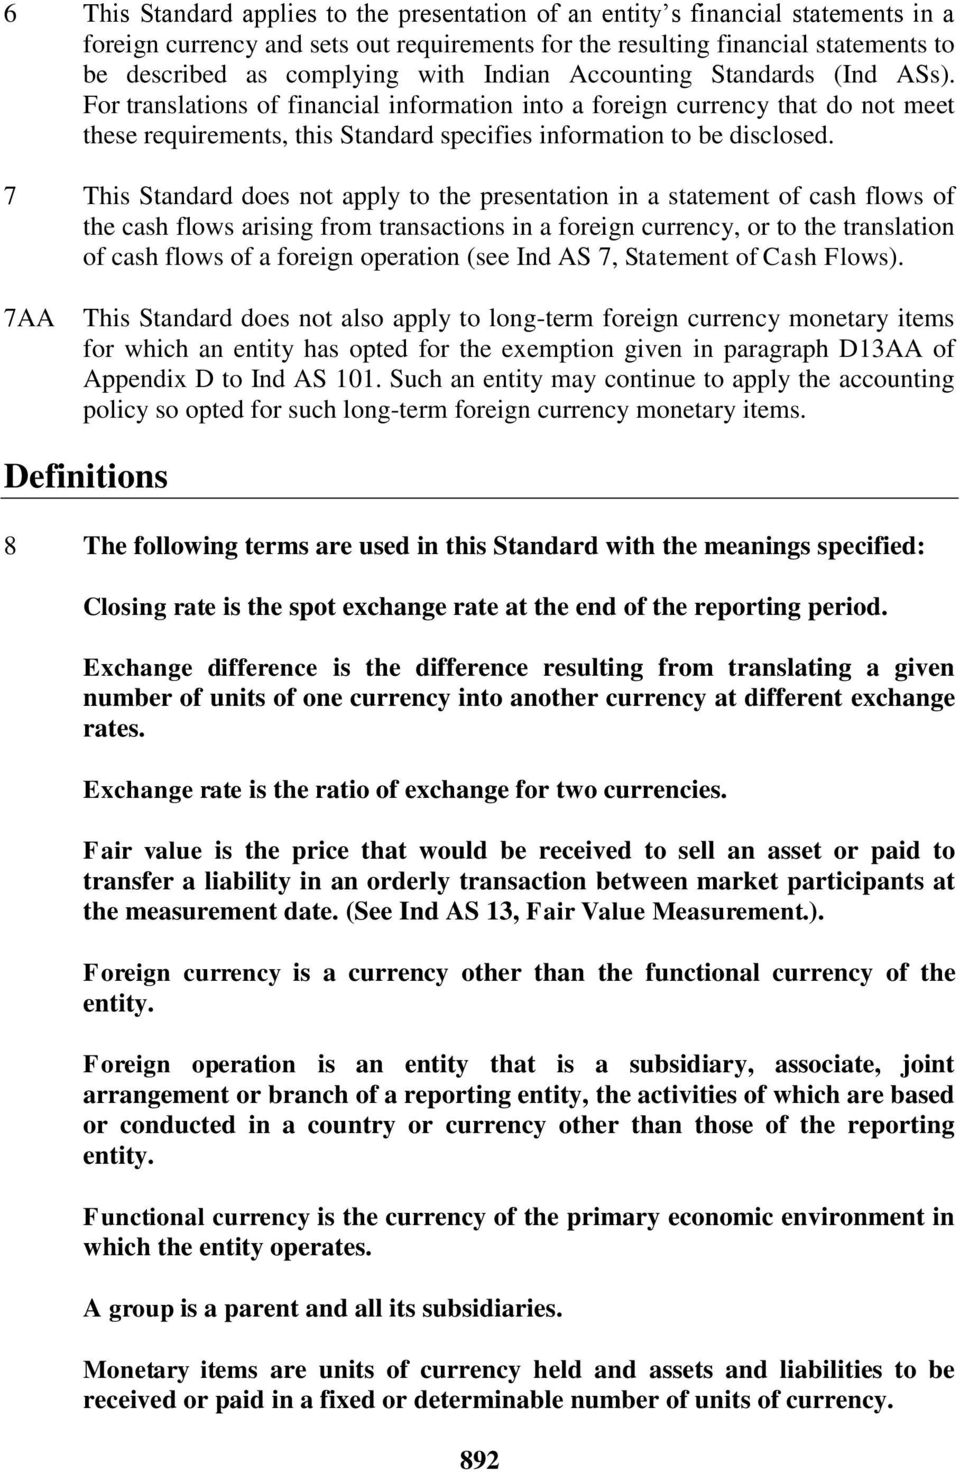 7 This Standard does not apply to the presentation in a statement of cash flows of the cash flows arising from transactions in a foreign currency, or to the translation of cash flows of a foreign